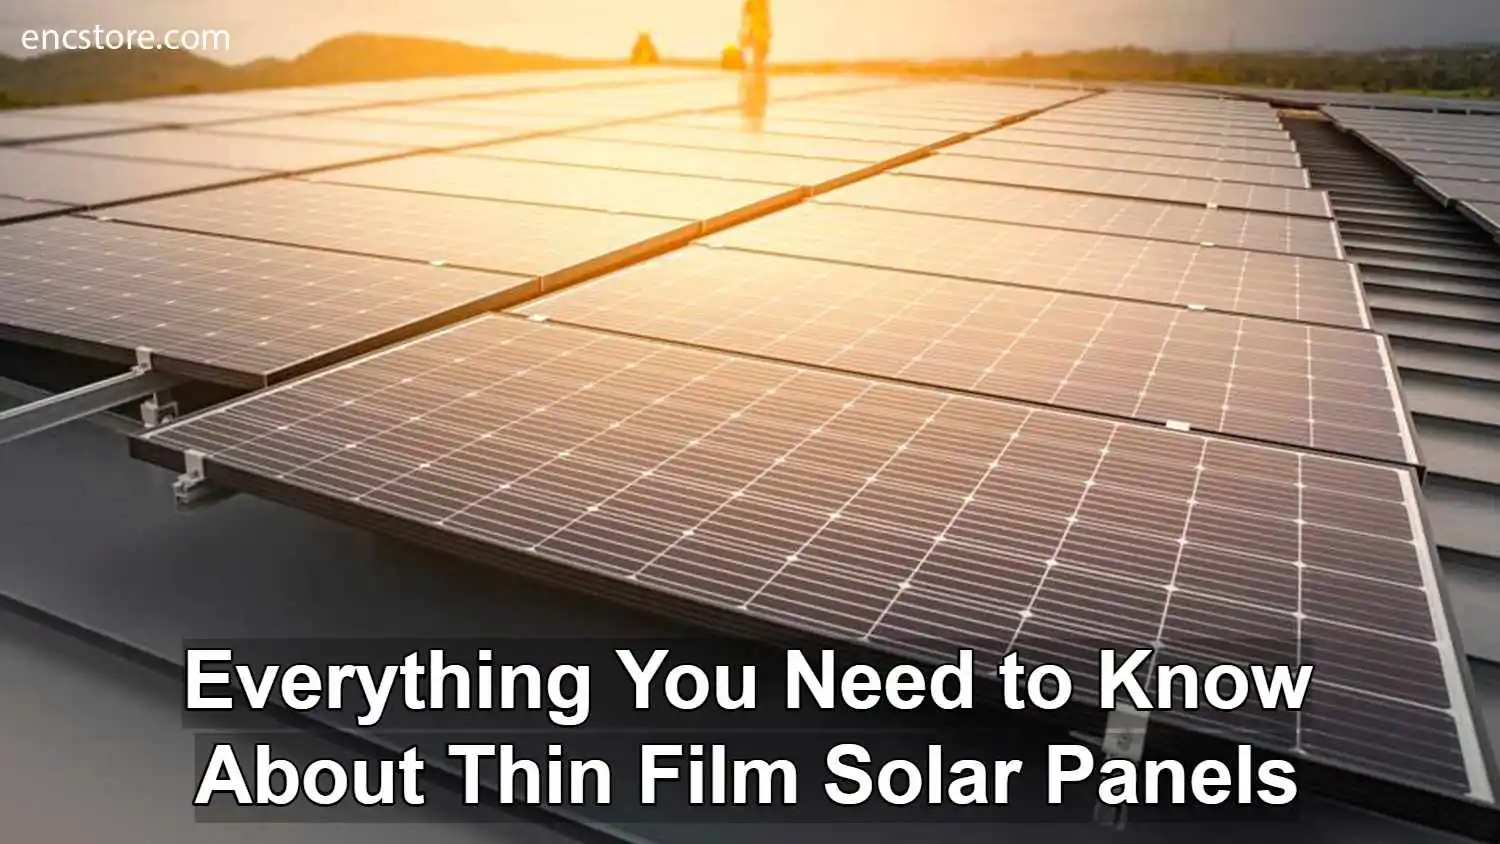 Everything You Need to Know About Thin Film Solar Panels